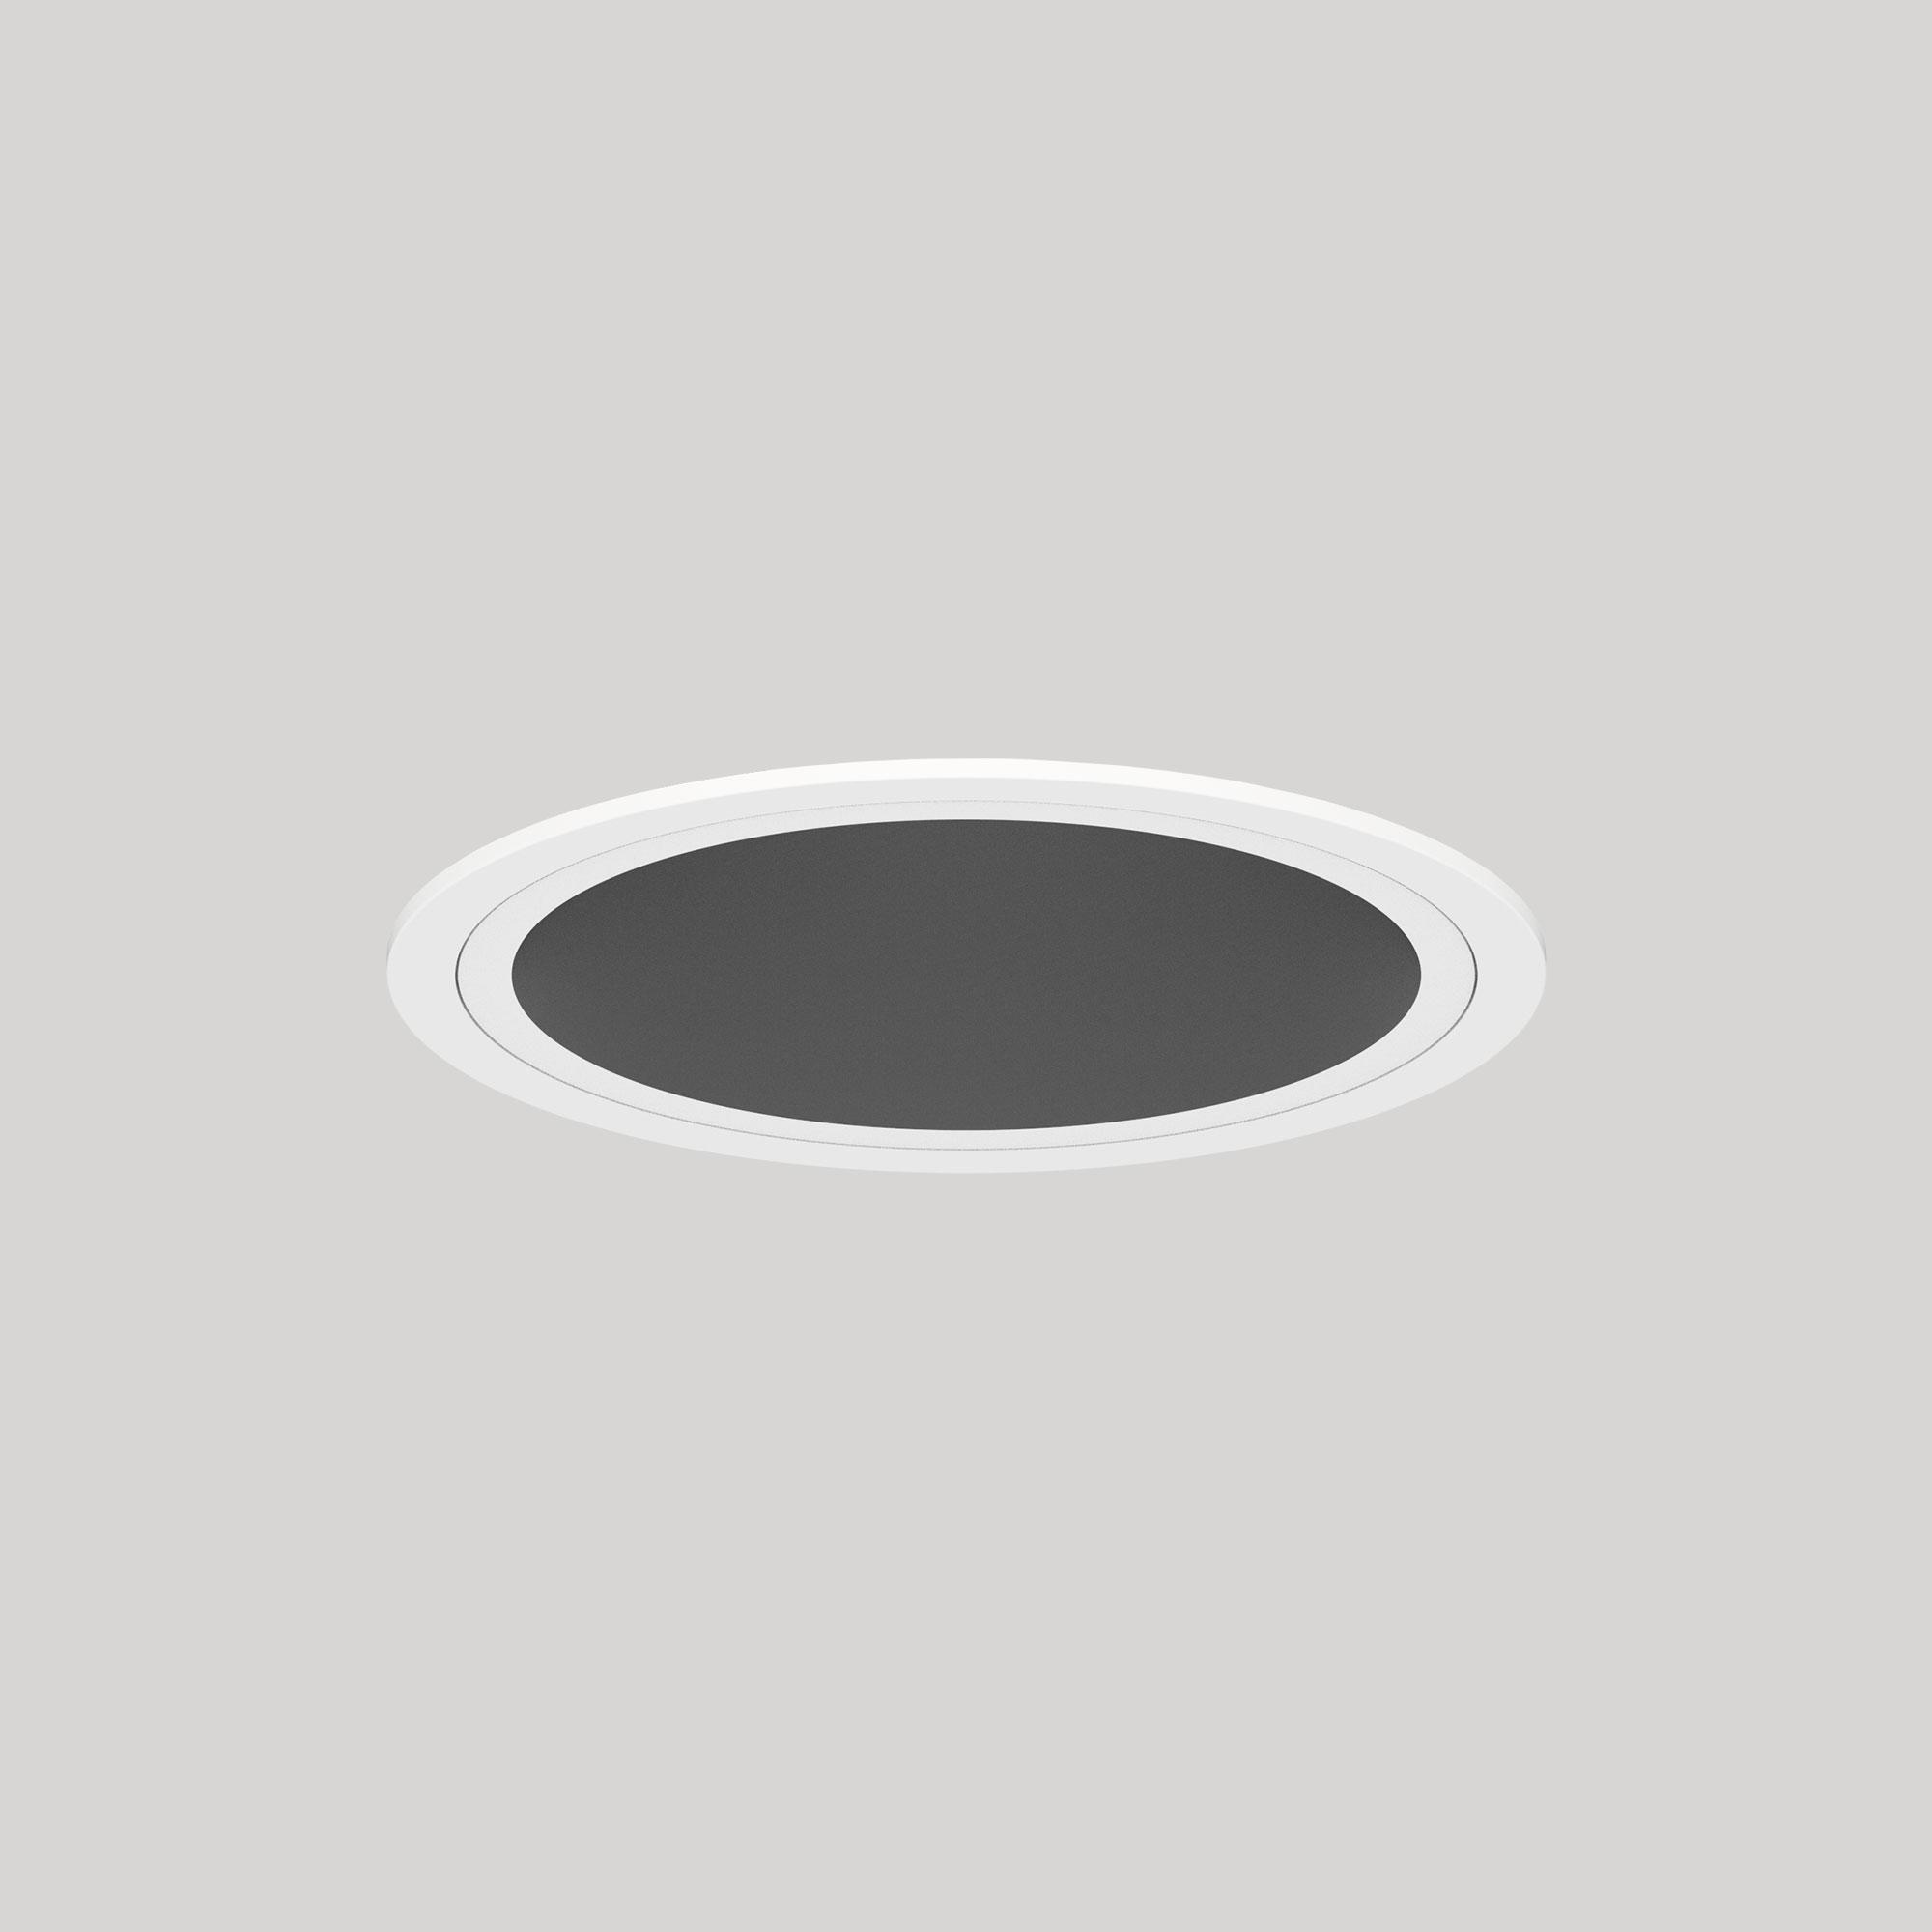 Standard 114mm Ceiling Recessed Round Fixed STD-E01C0Q-WBP - Standard-STD-E01-WB-Installed.jpg